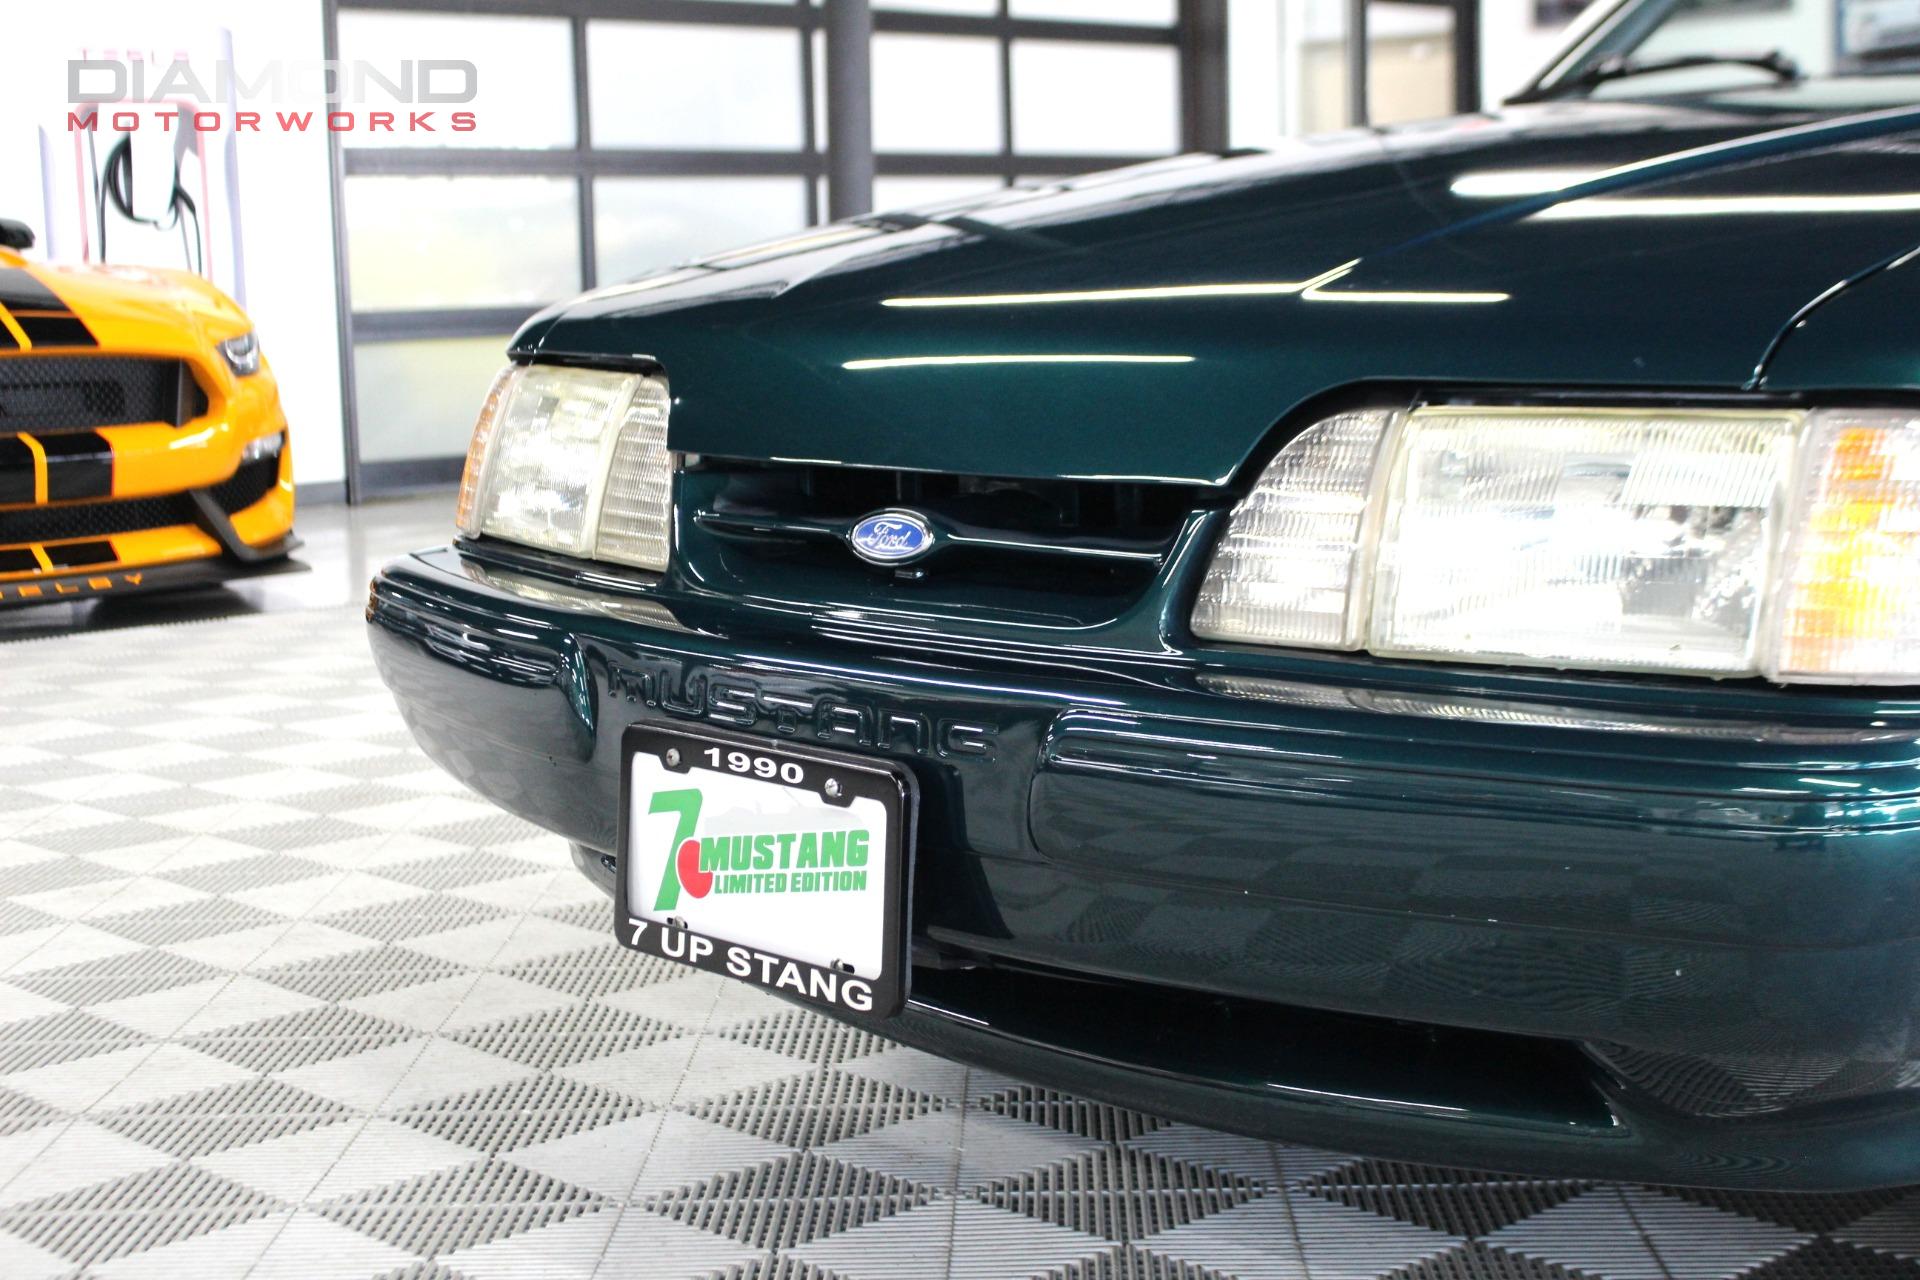 Used-1990-Ford-Mustang-LX-50-Limited-Edition-7UP